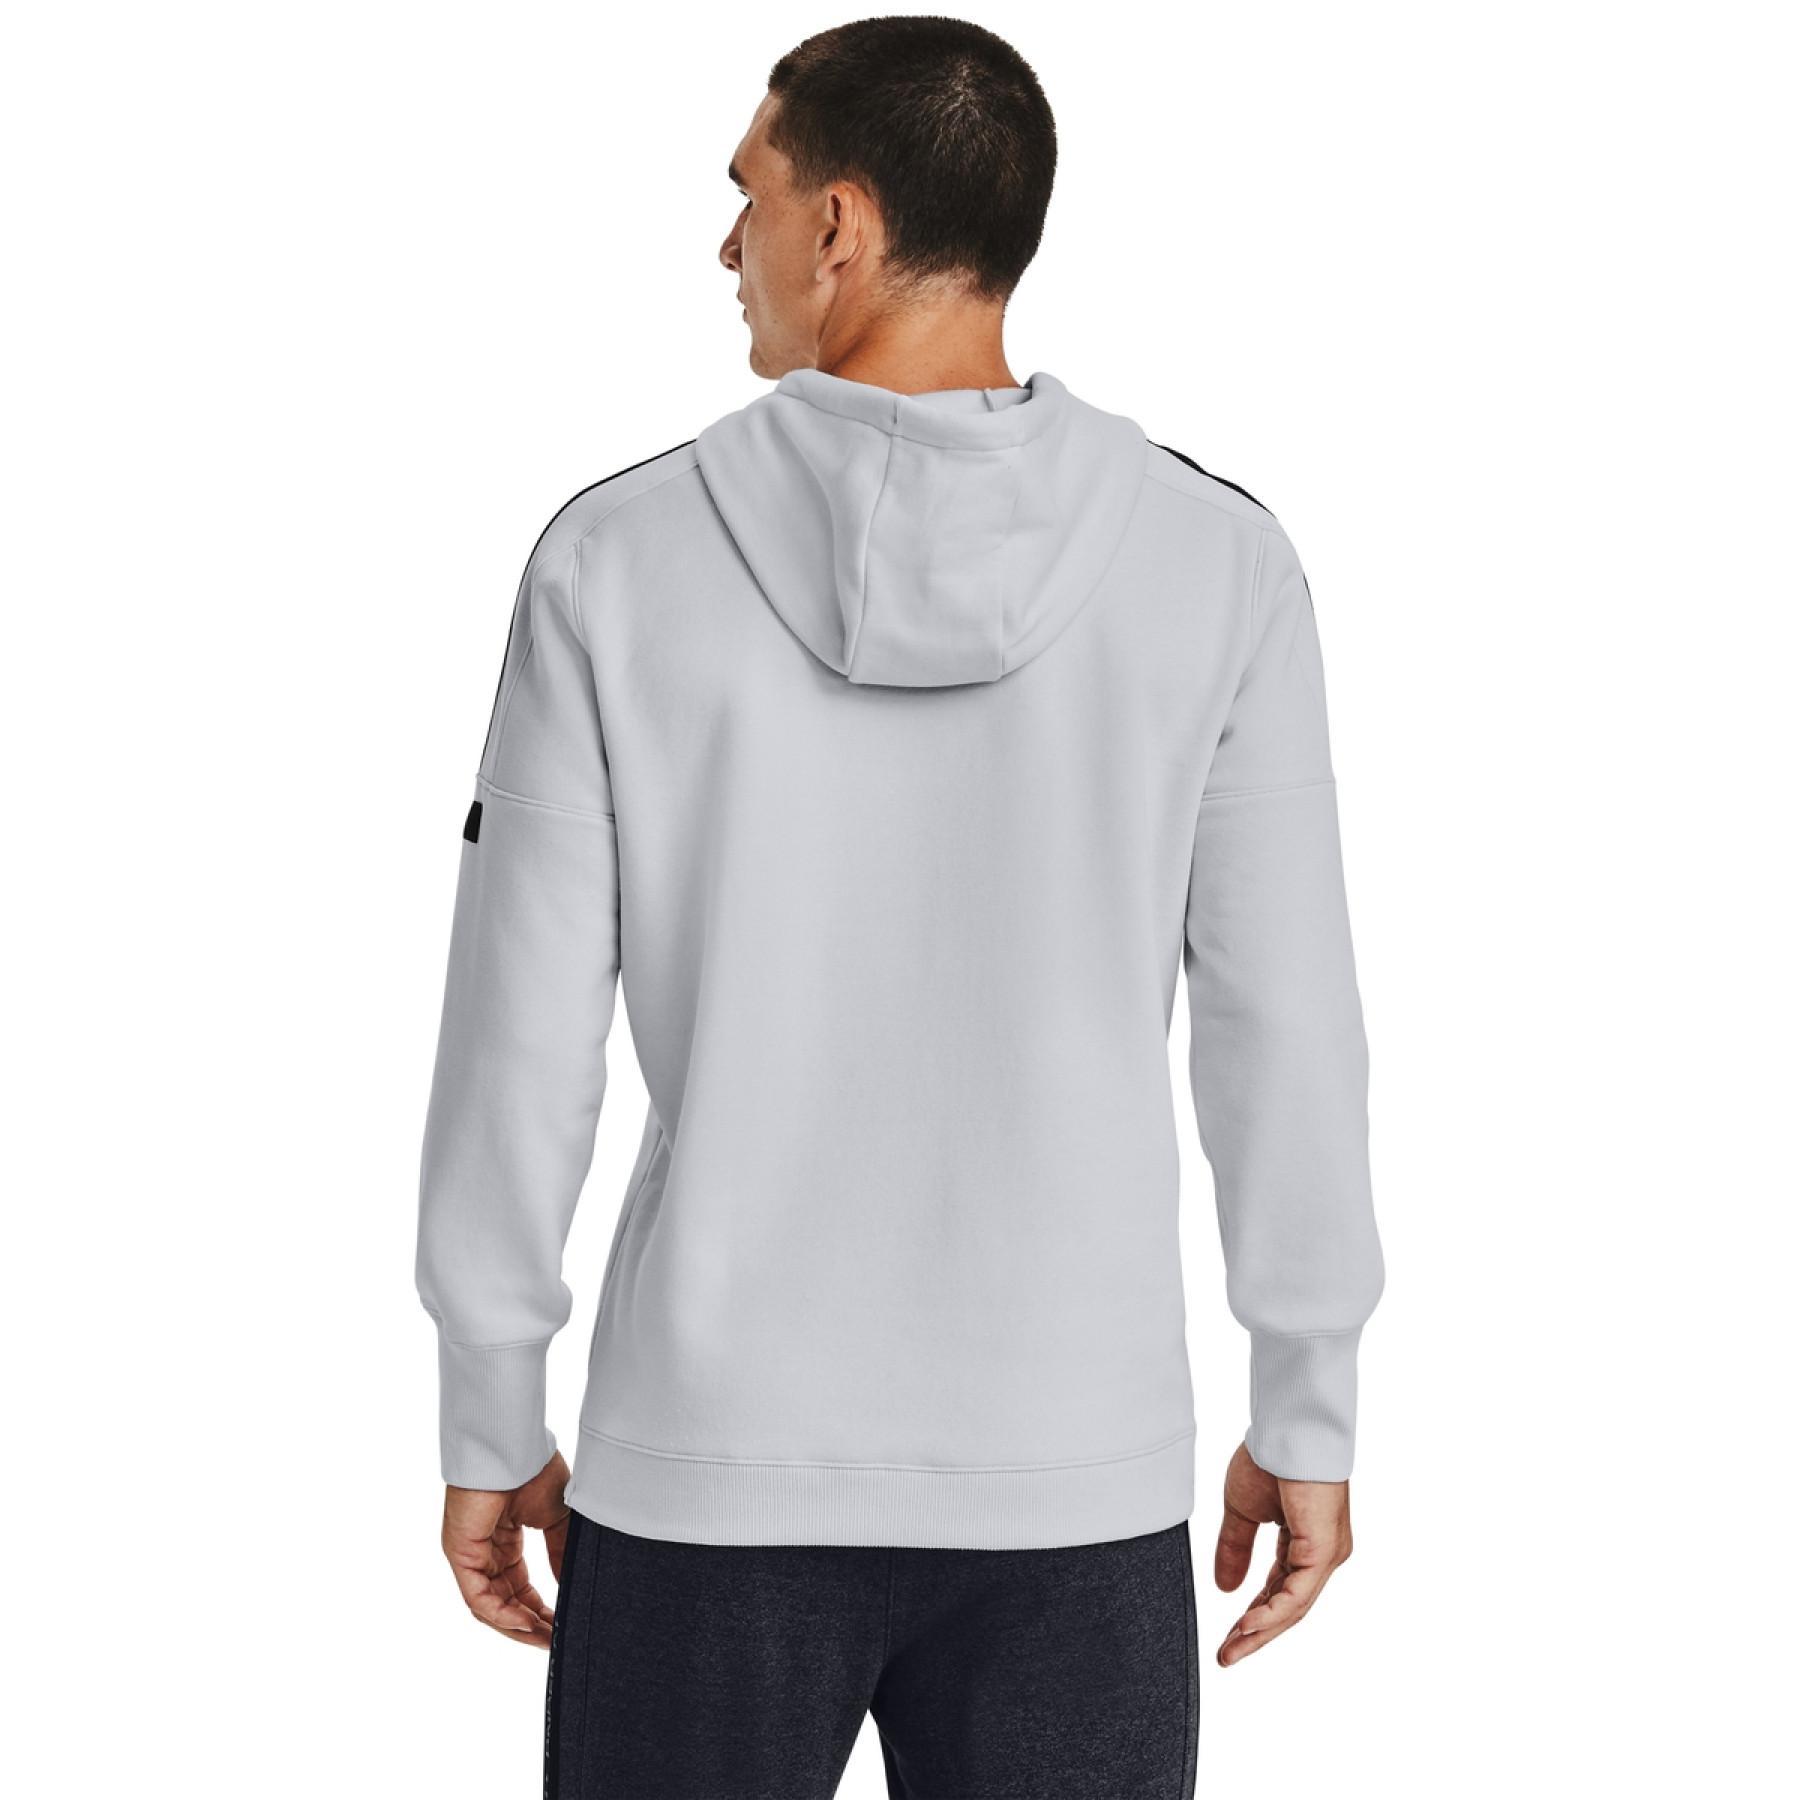 Sudadera con capucha Under Armour Accelerate Off-Pitch